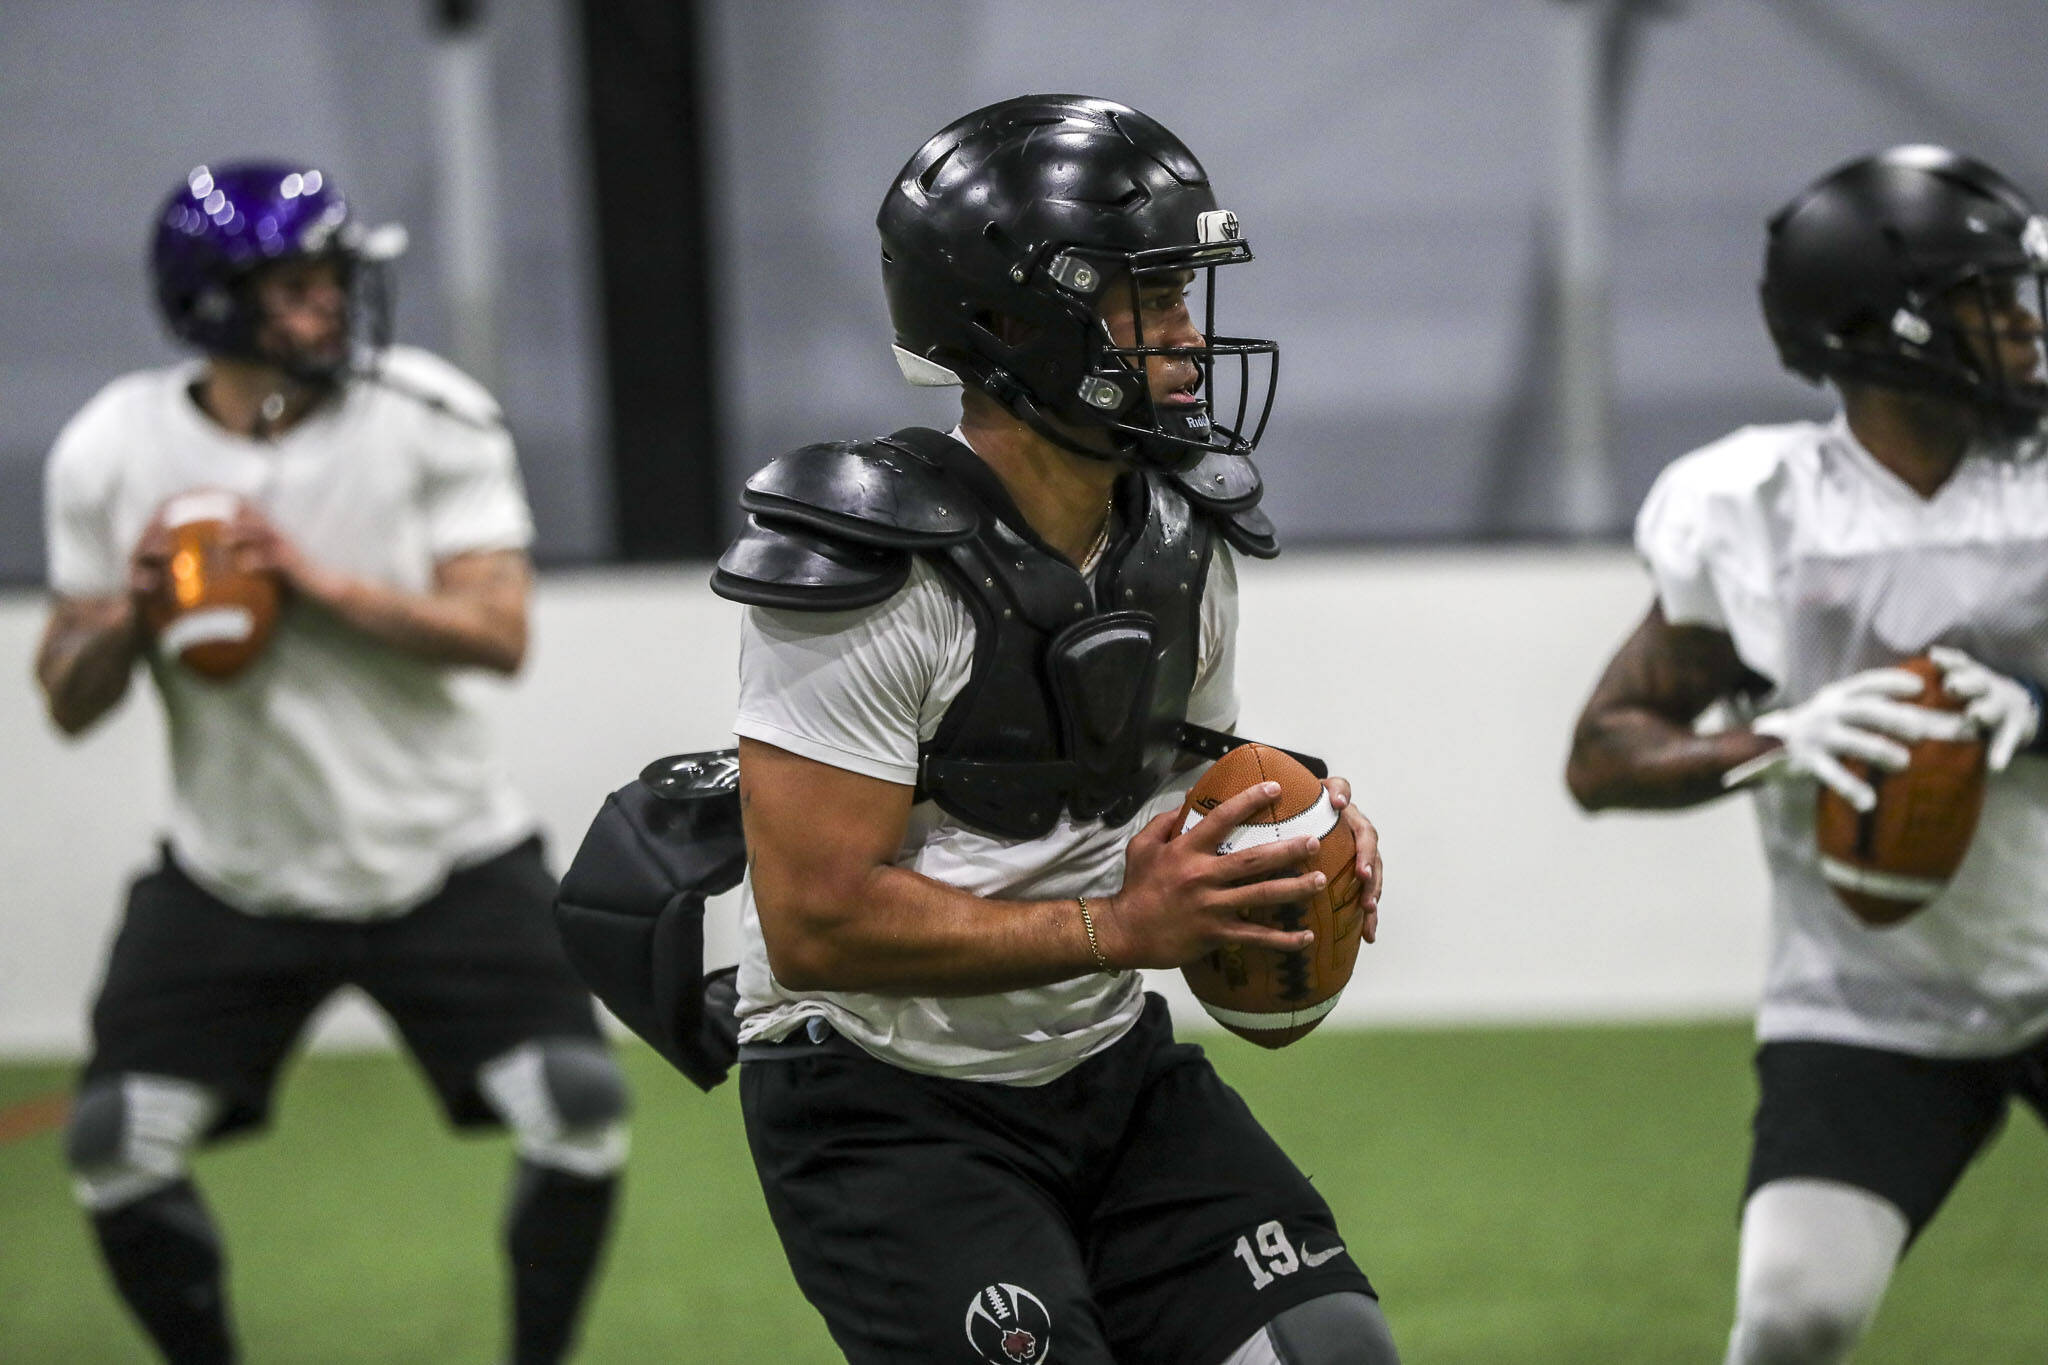 Players run drills during a Washington Wolfpack of the AFL training camp at the Snohomish Soccer Dome on Wednesday, April 10, 2024 in Snohomish, Washington. (Annie Barker / The Herald)